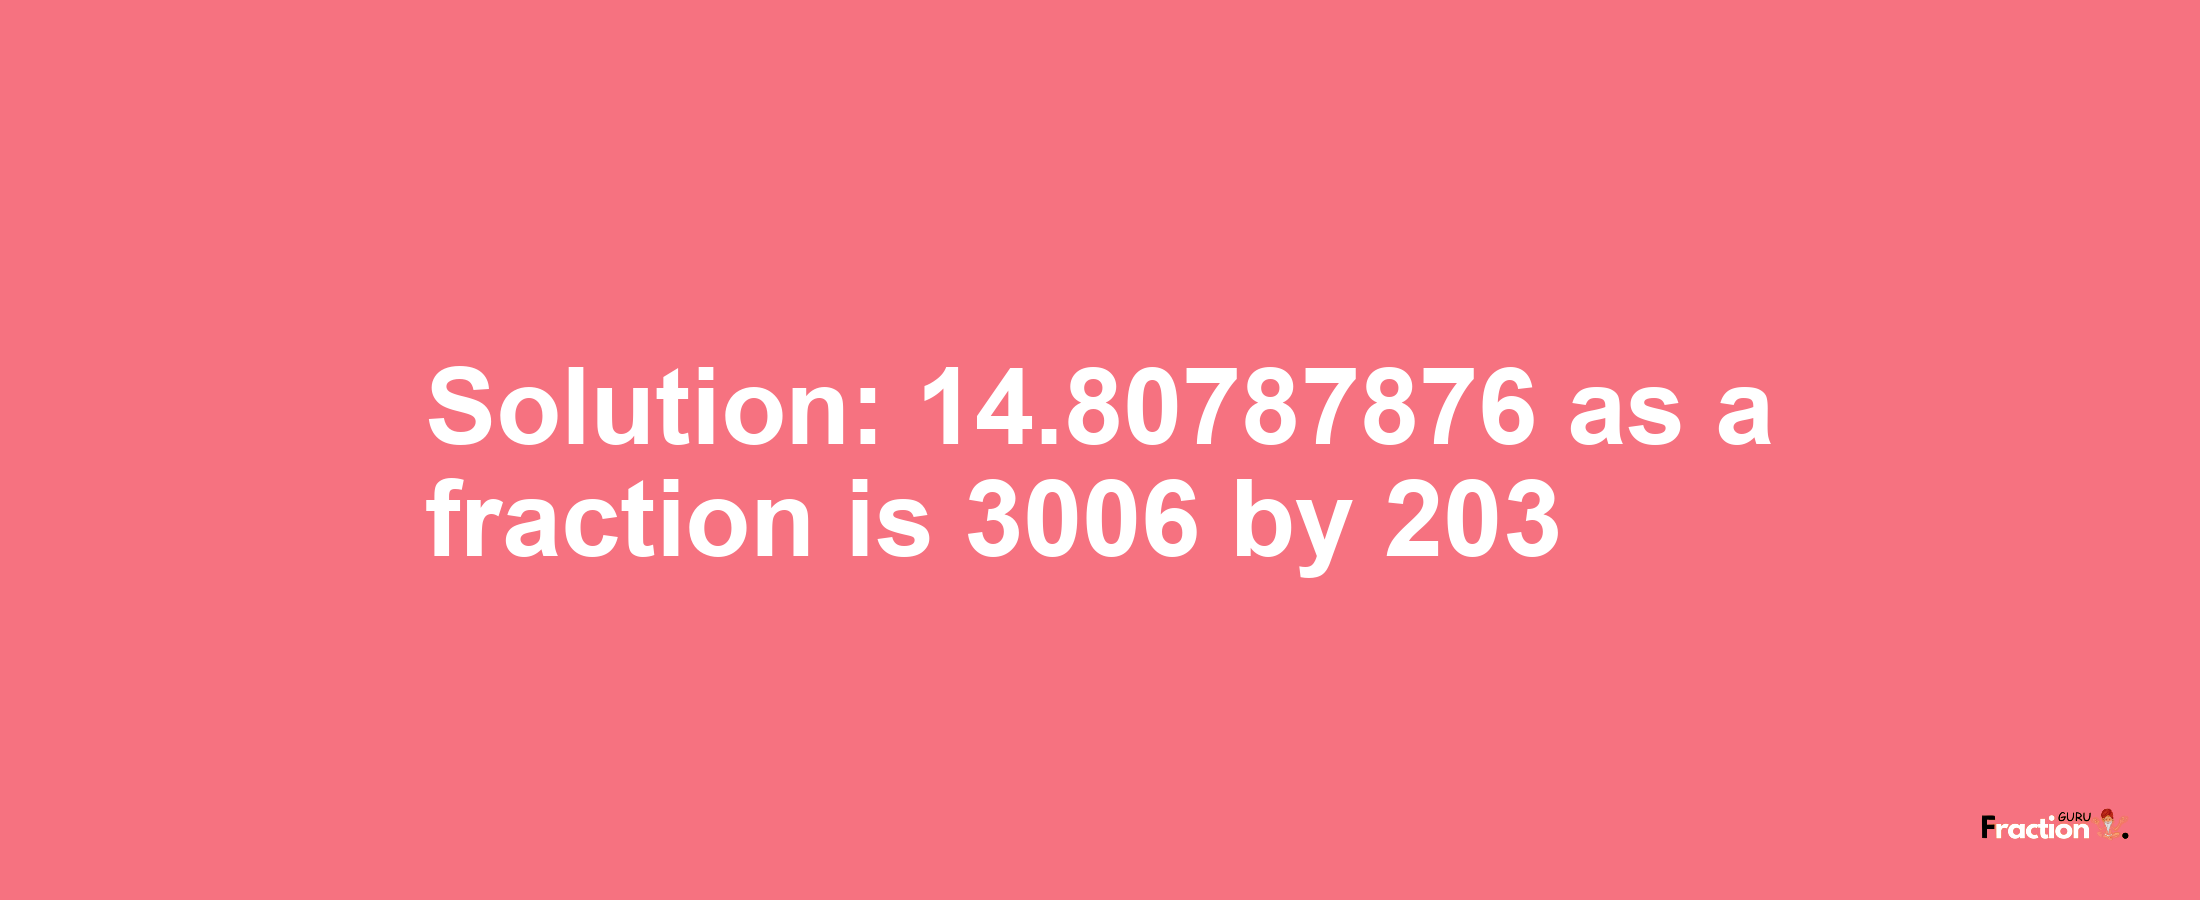 Solution:14.80787876 as a fraction is 3006/203